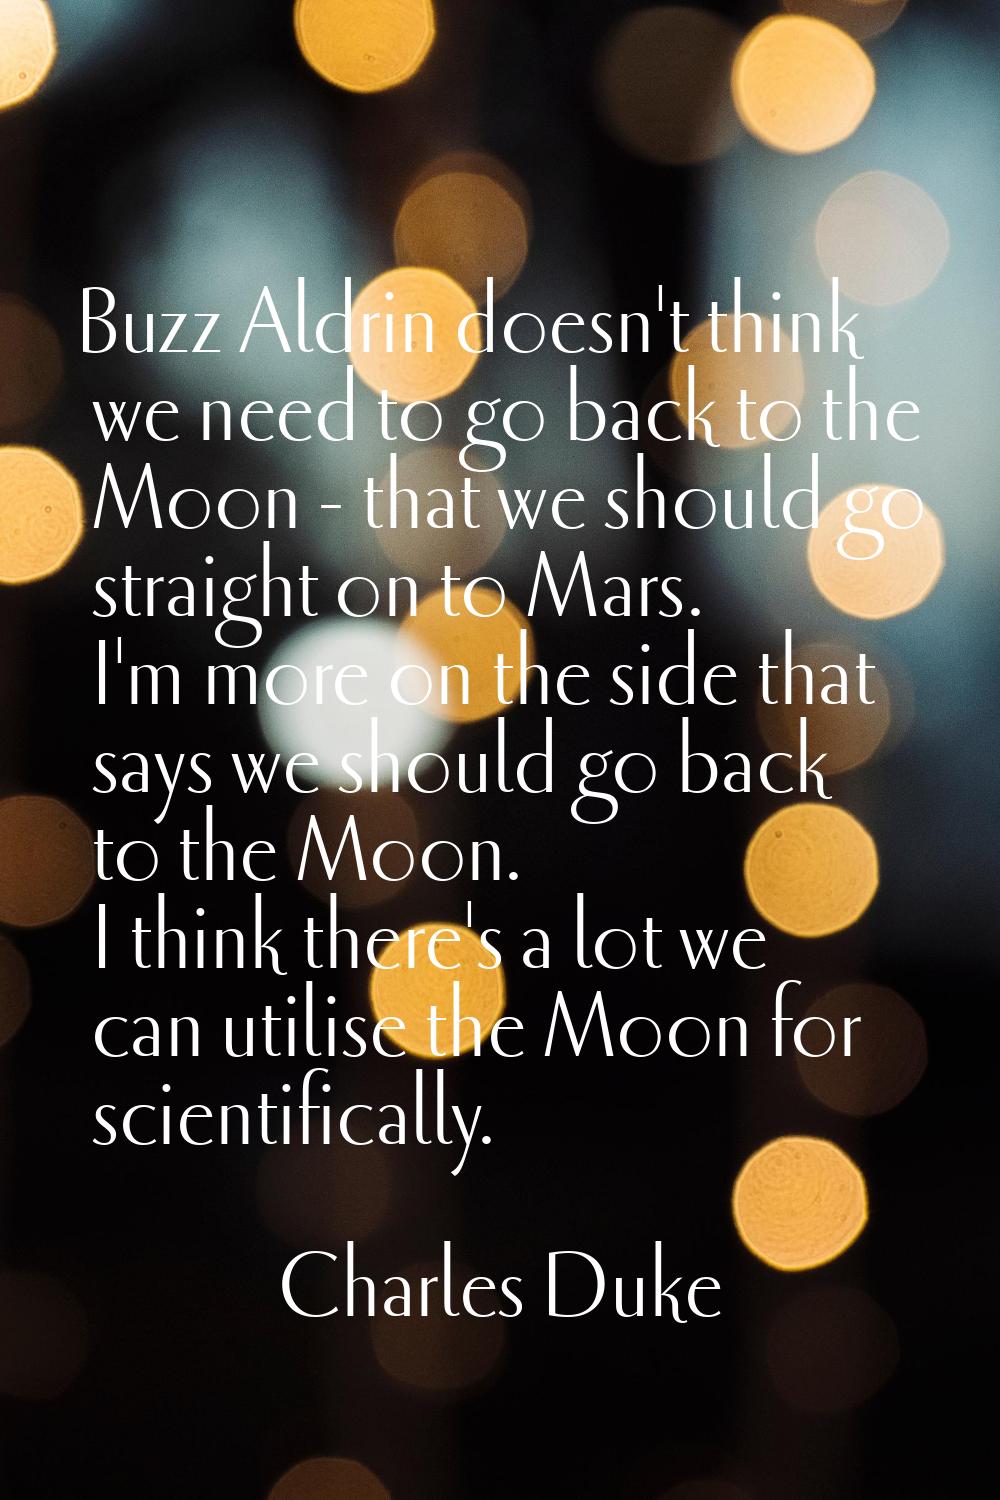 Buzz Aldrin doesn't think we need to go back to the Moon - that we should go straight on to Mars. I